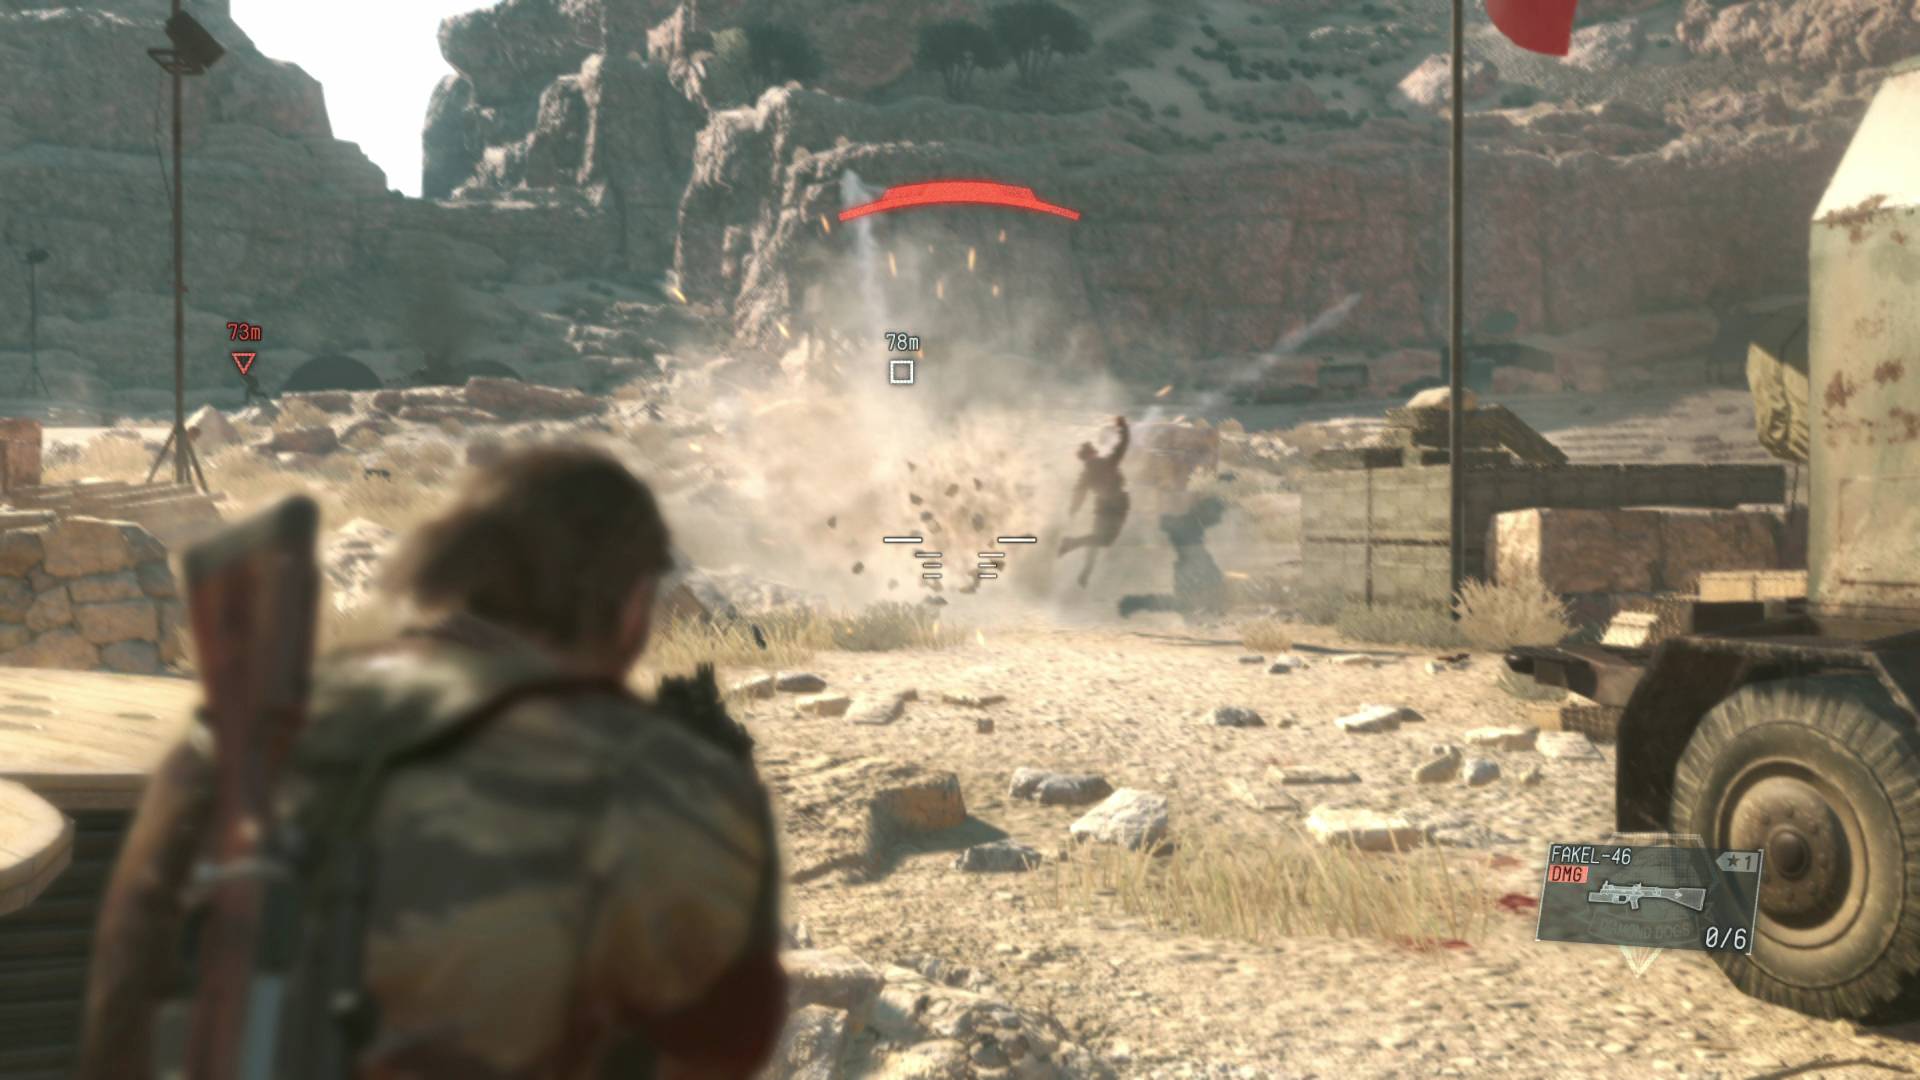 METAL GEAR SOLID V THE PHANTOM PAIN Images 